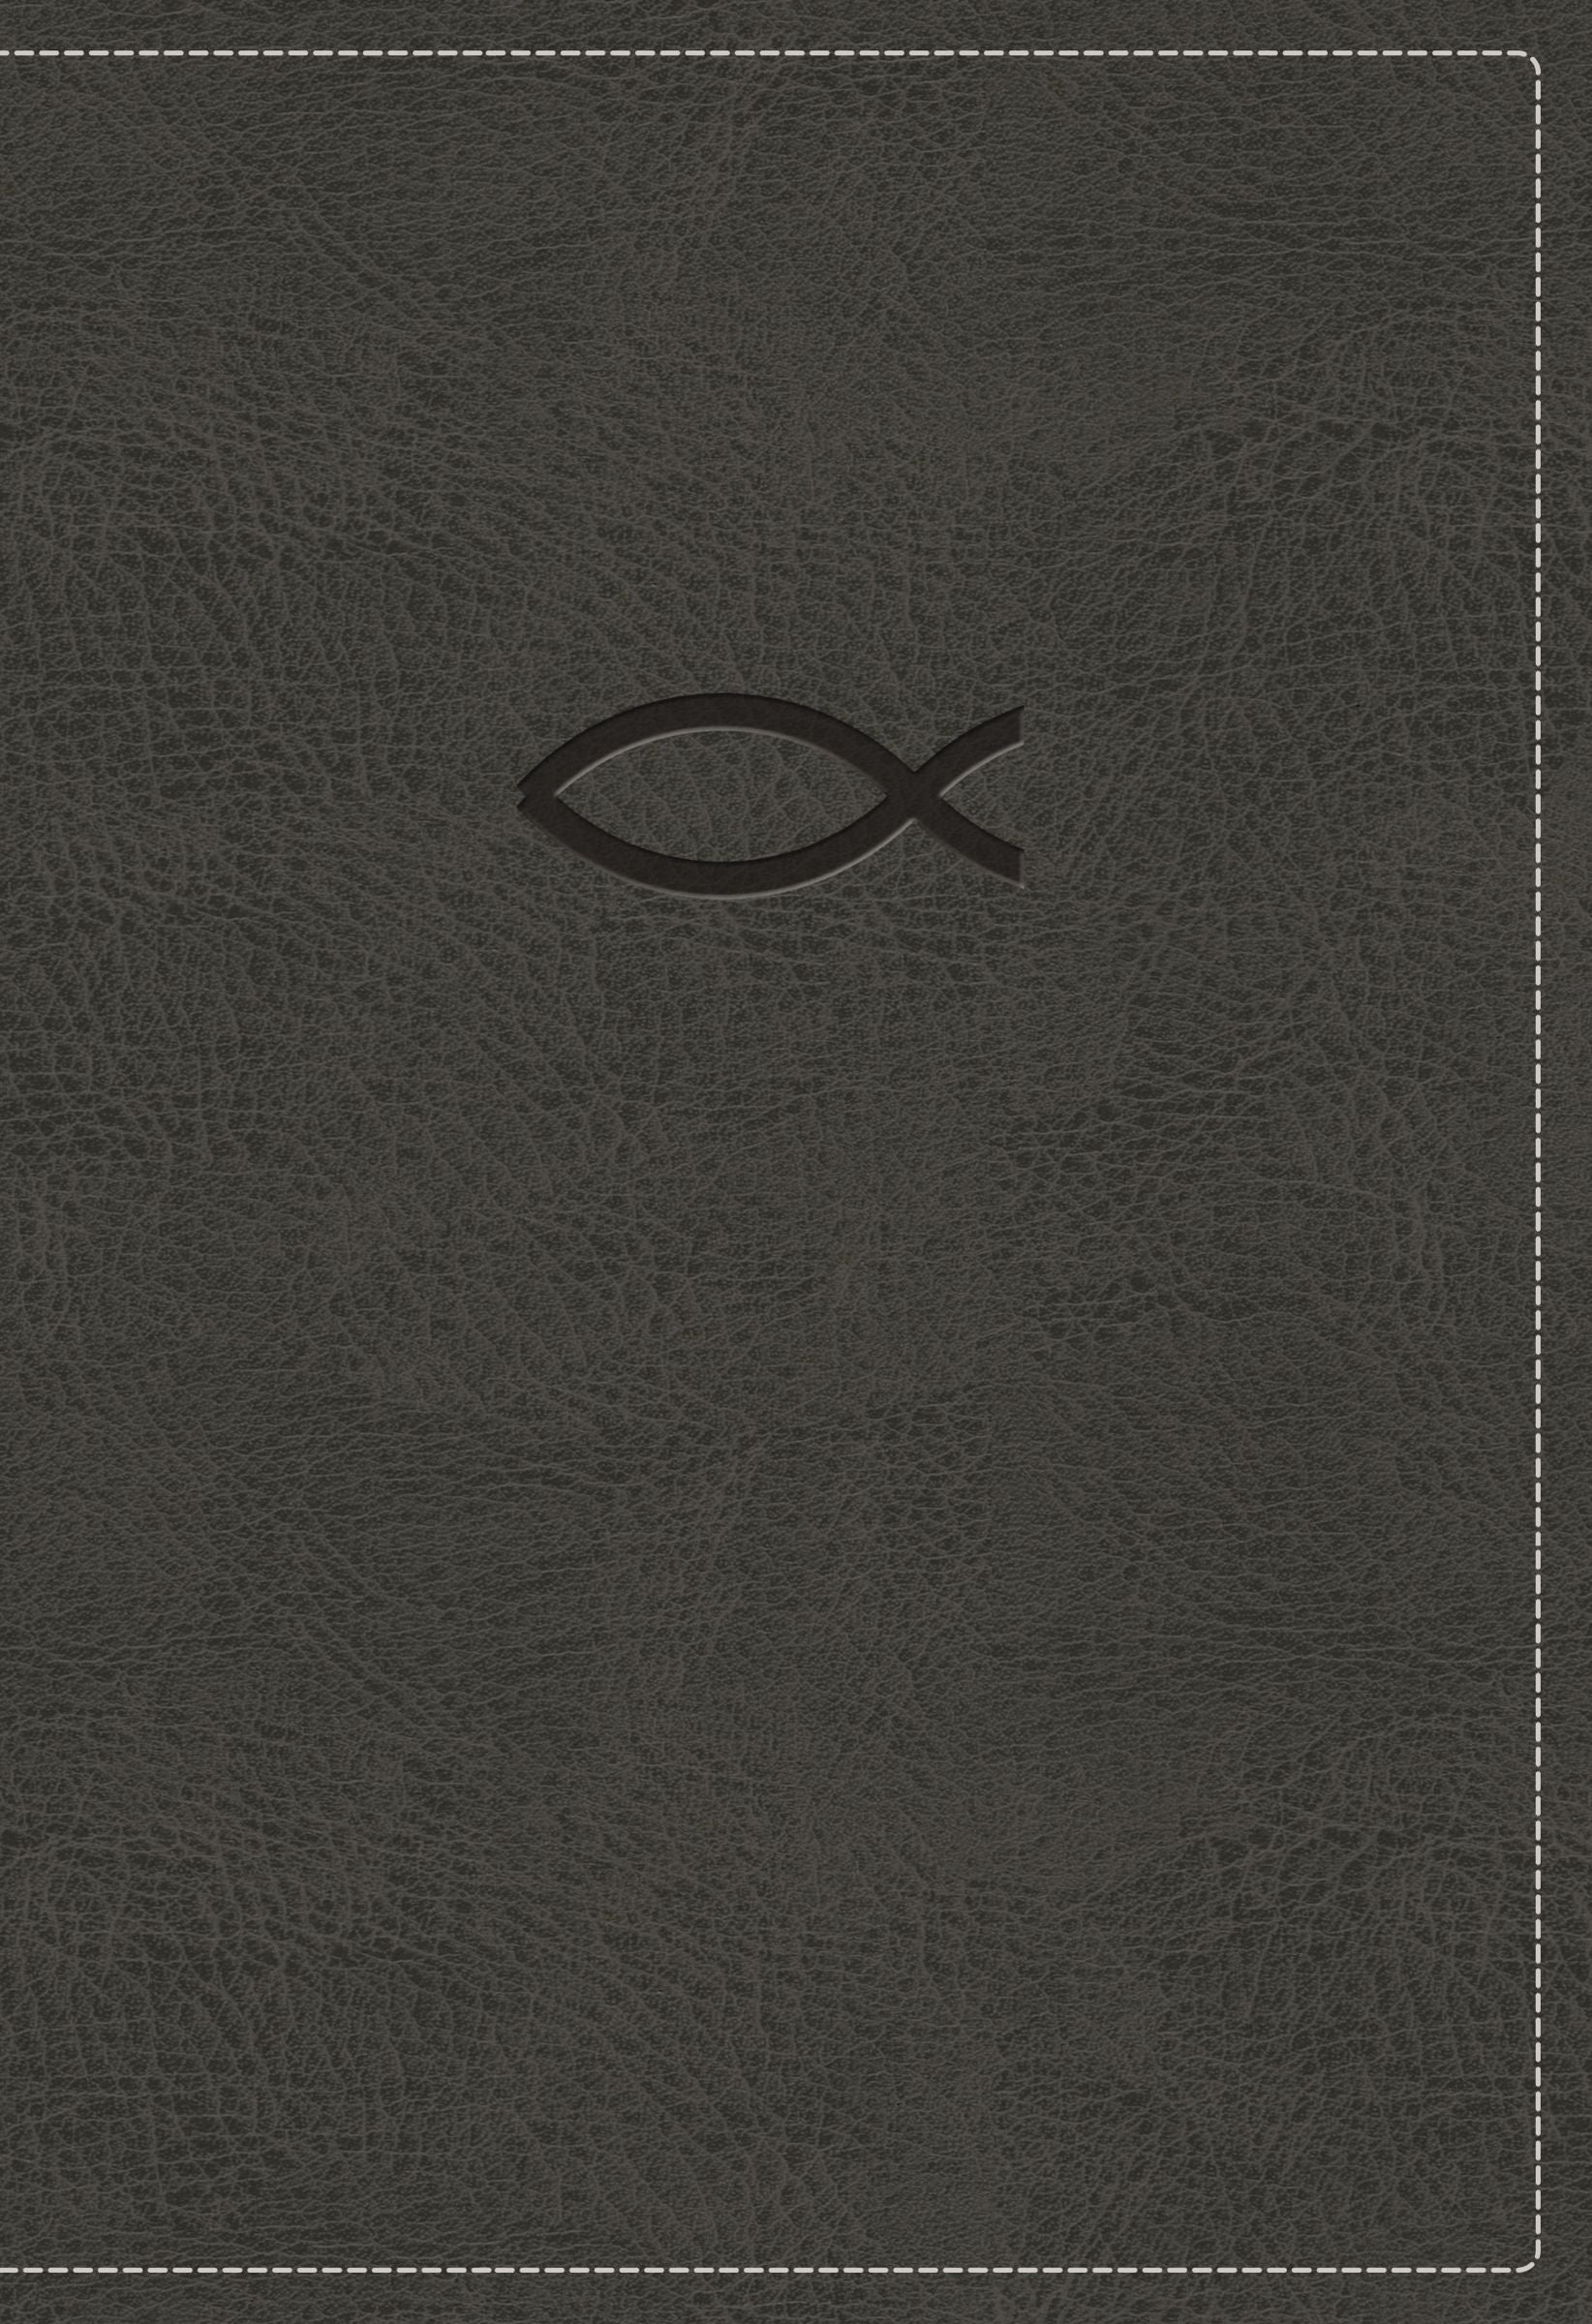 Image of NKJV, Thinline Bible Youth Edition other